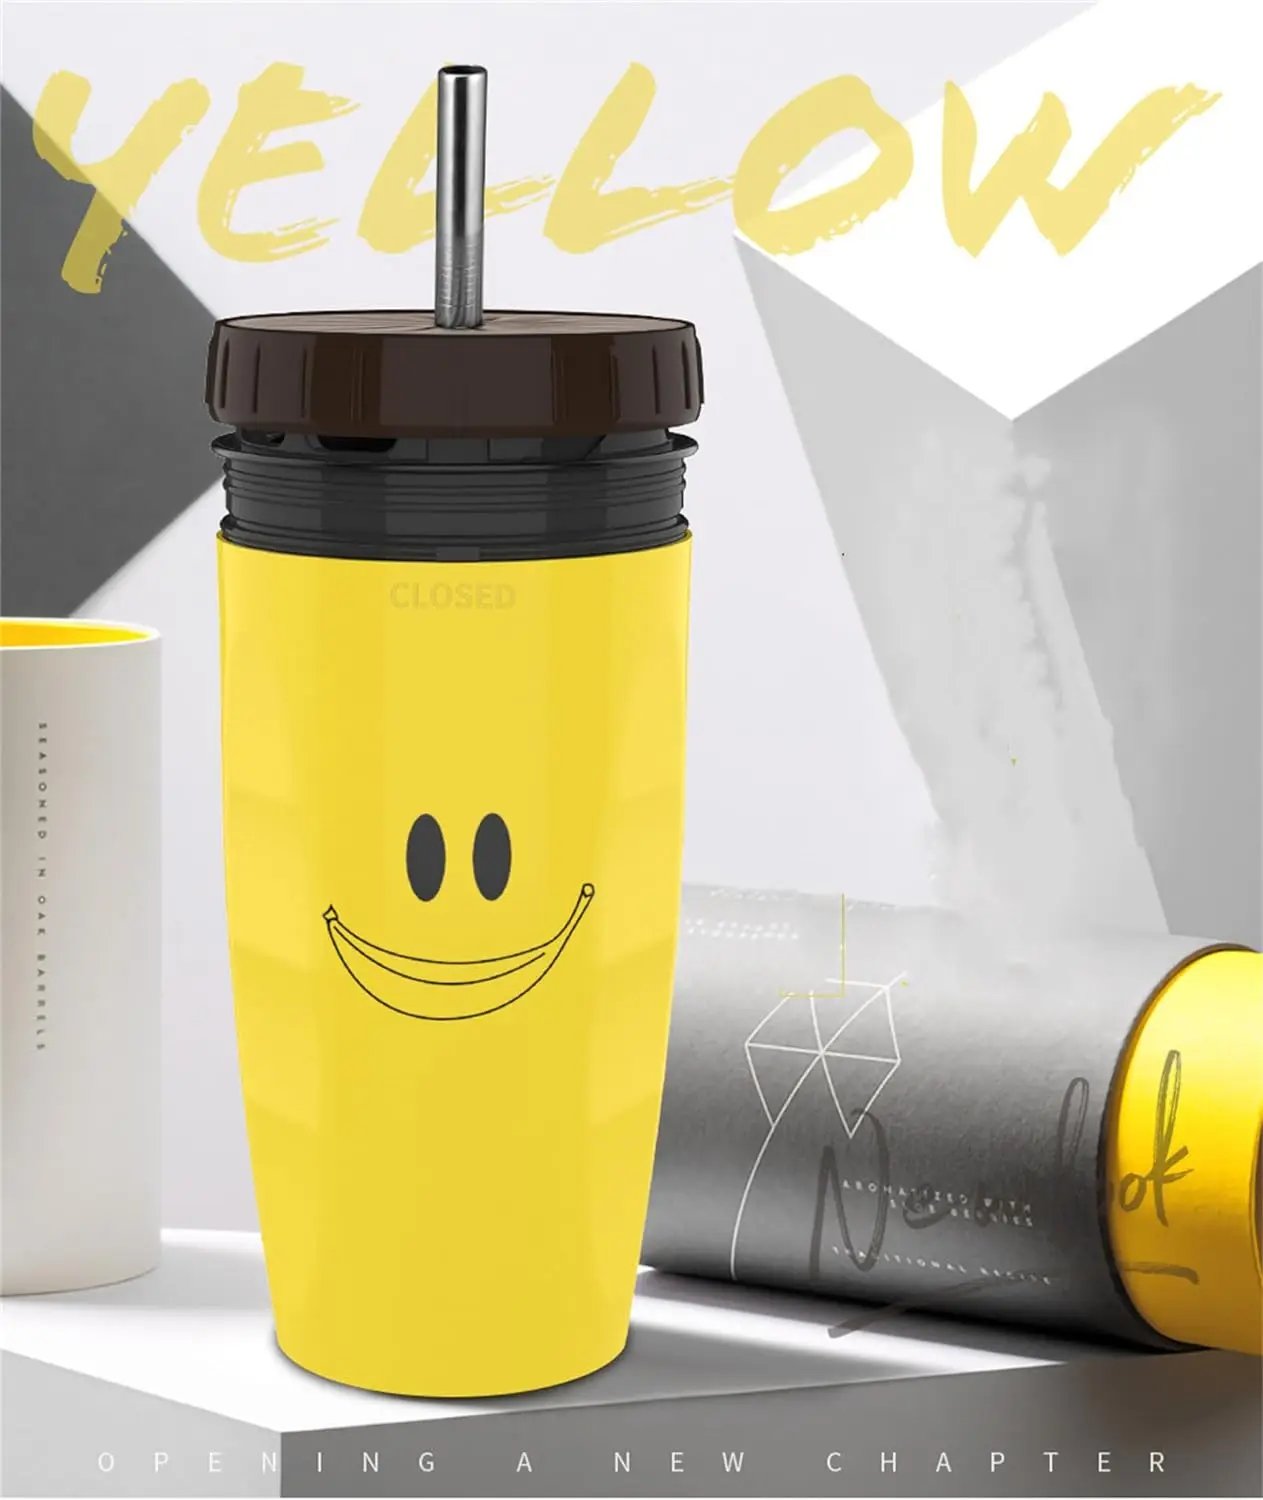 https://ae01.alicdn.com/kf/Sb13d4d6b9f2a4b0fb644f466f52cedf6W/Twizz-Travel-Mug-Cup-Non-Spill-Cup-Twistable-Water-Cup-Coffee-Milk-Aperture-Mug-with-Straw.jpeg